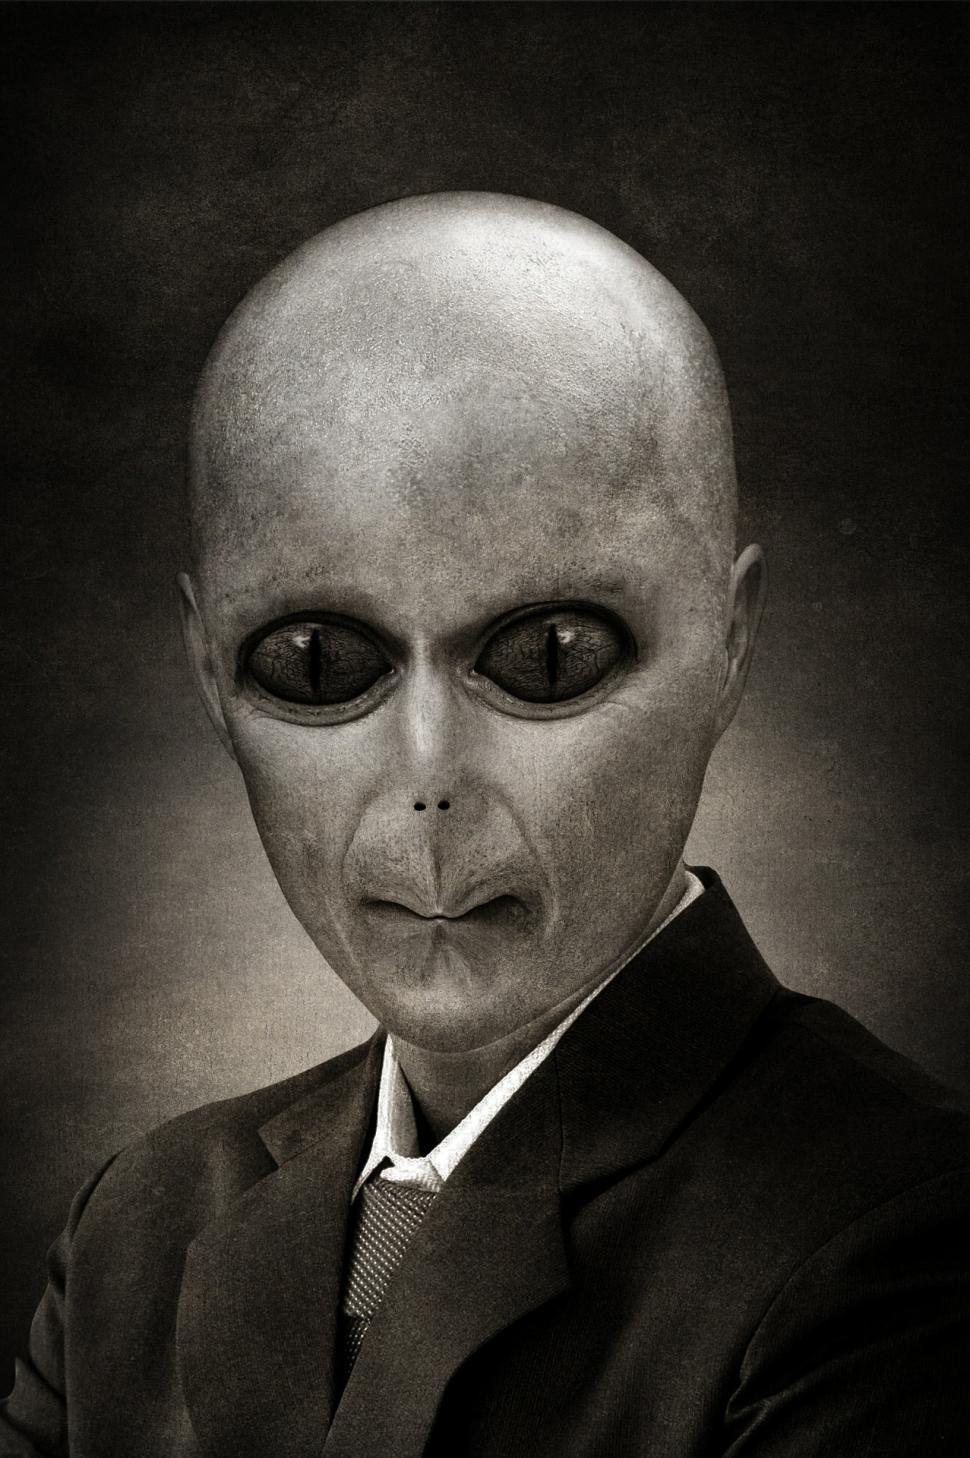 Free Image of Bald Man in Suit and Tie 